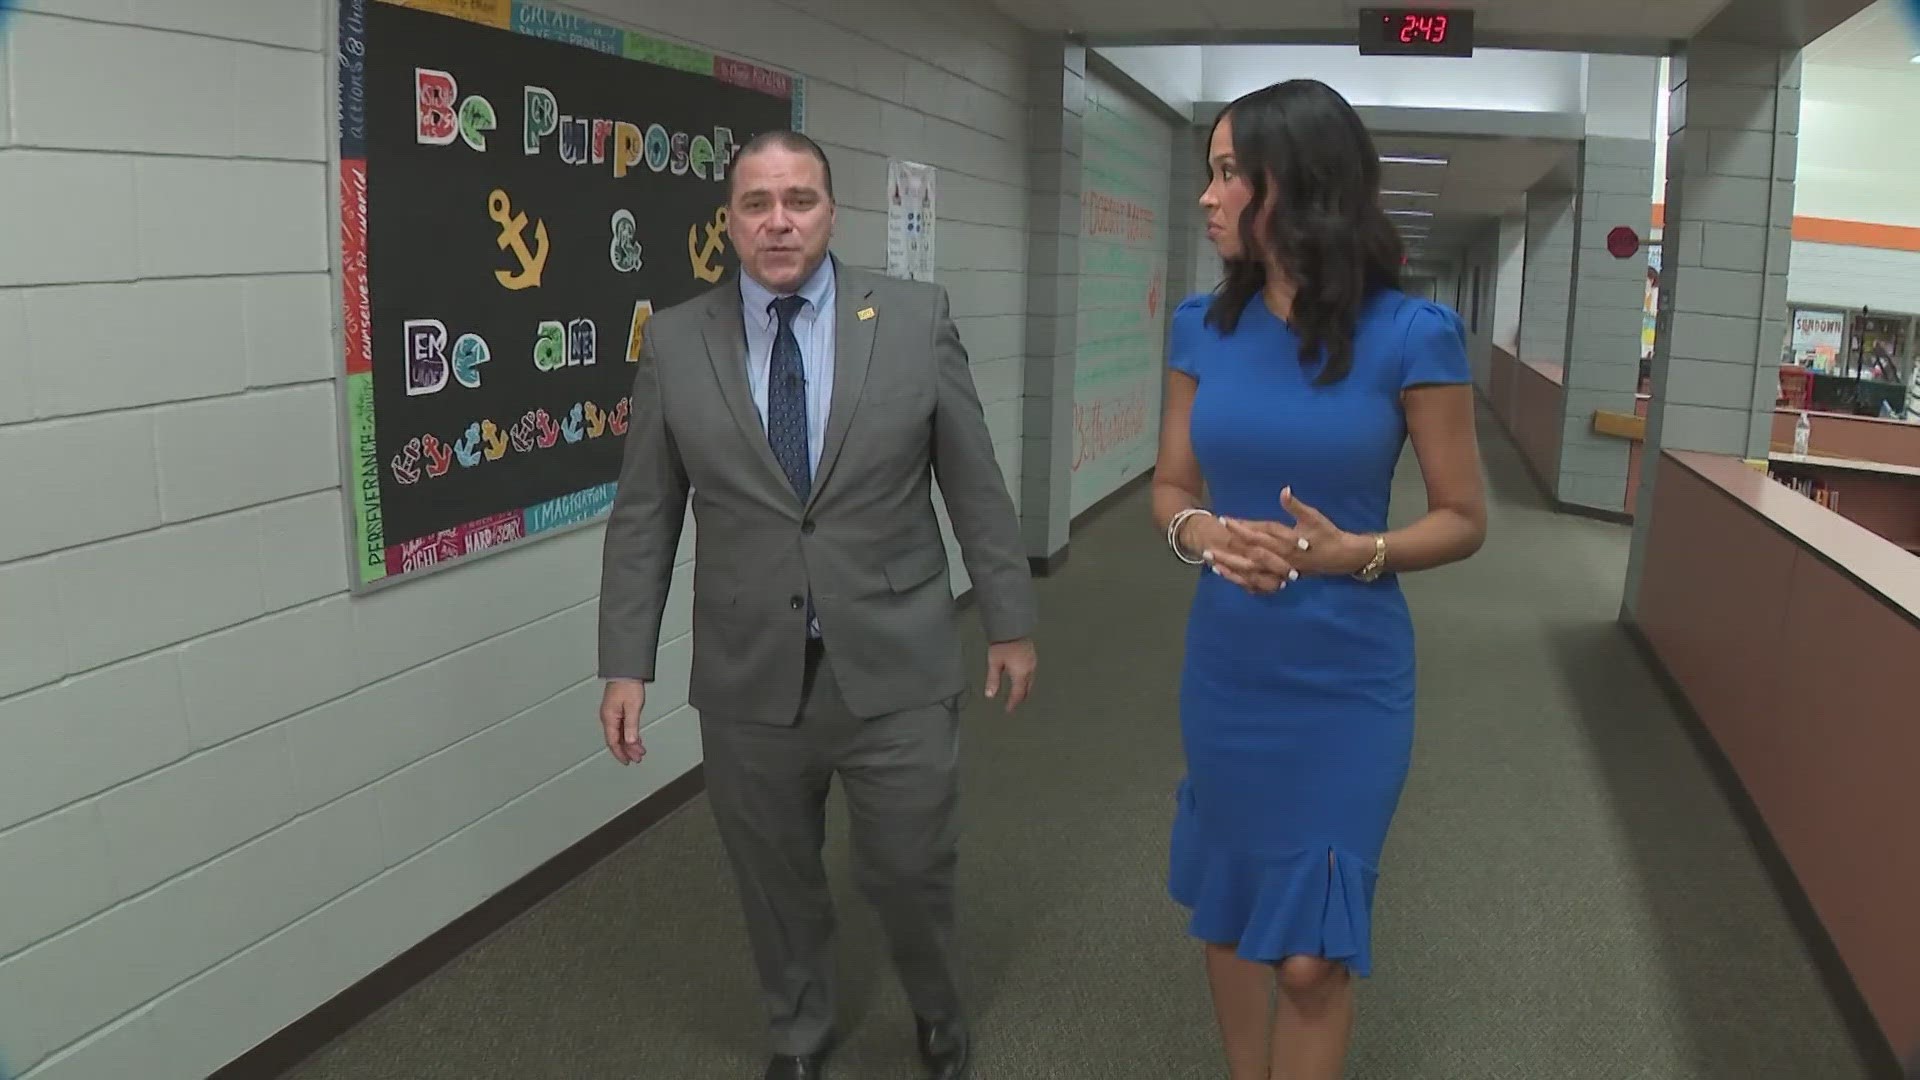 It's a new school year for Katy ISD, and their superintendent Dr. Ken Gregorski talked to KHOU 11 about what to expect.